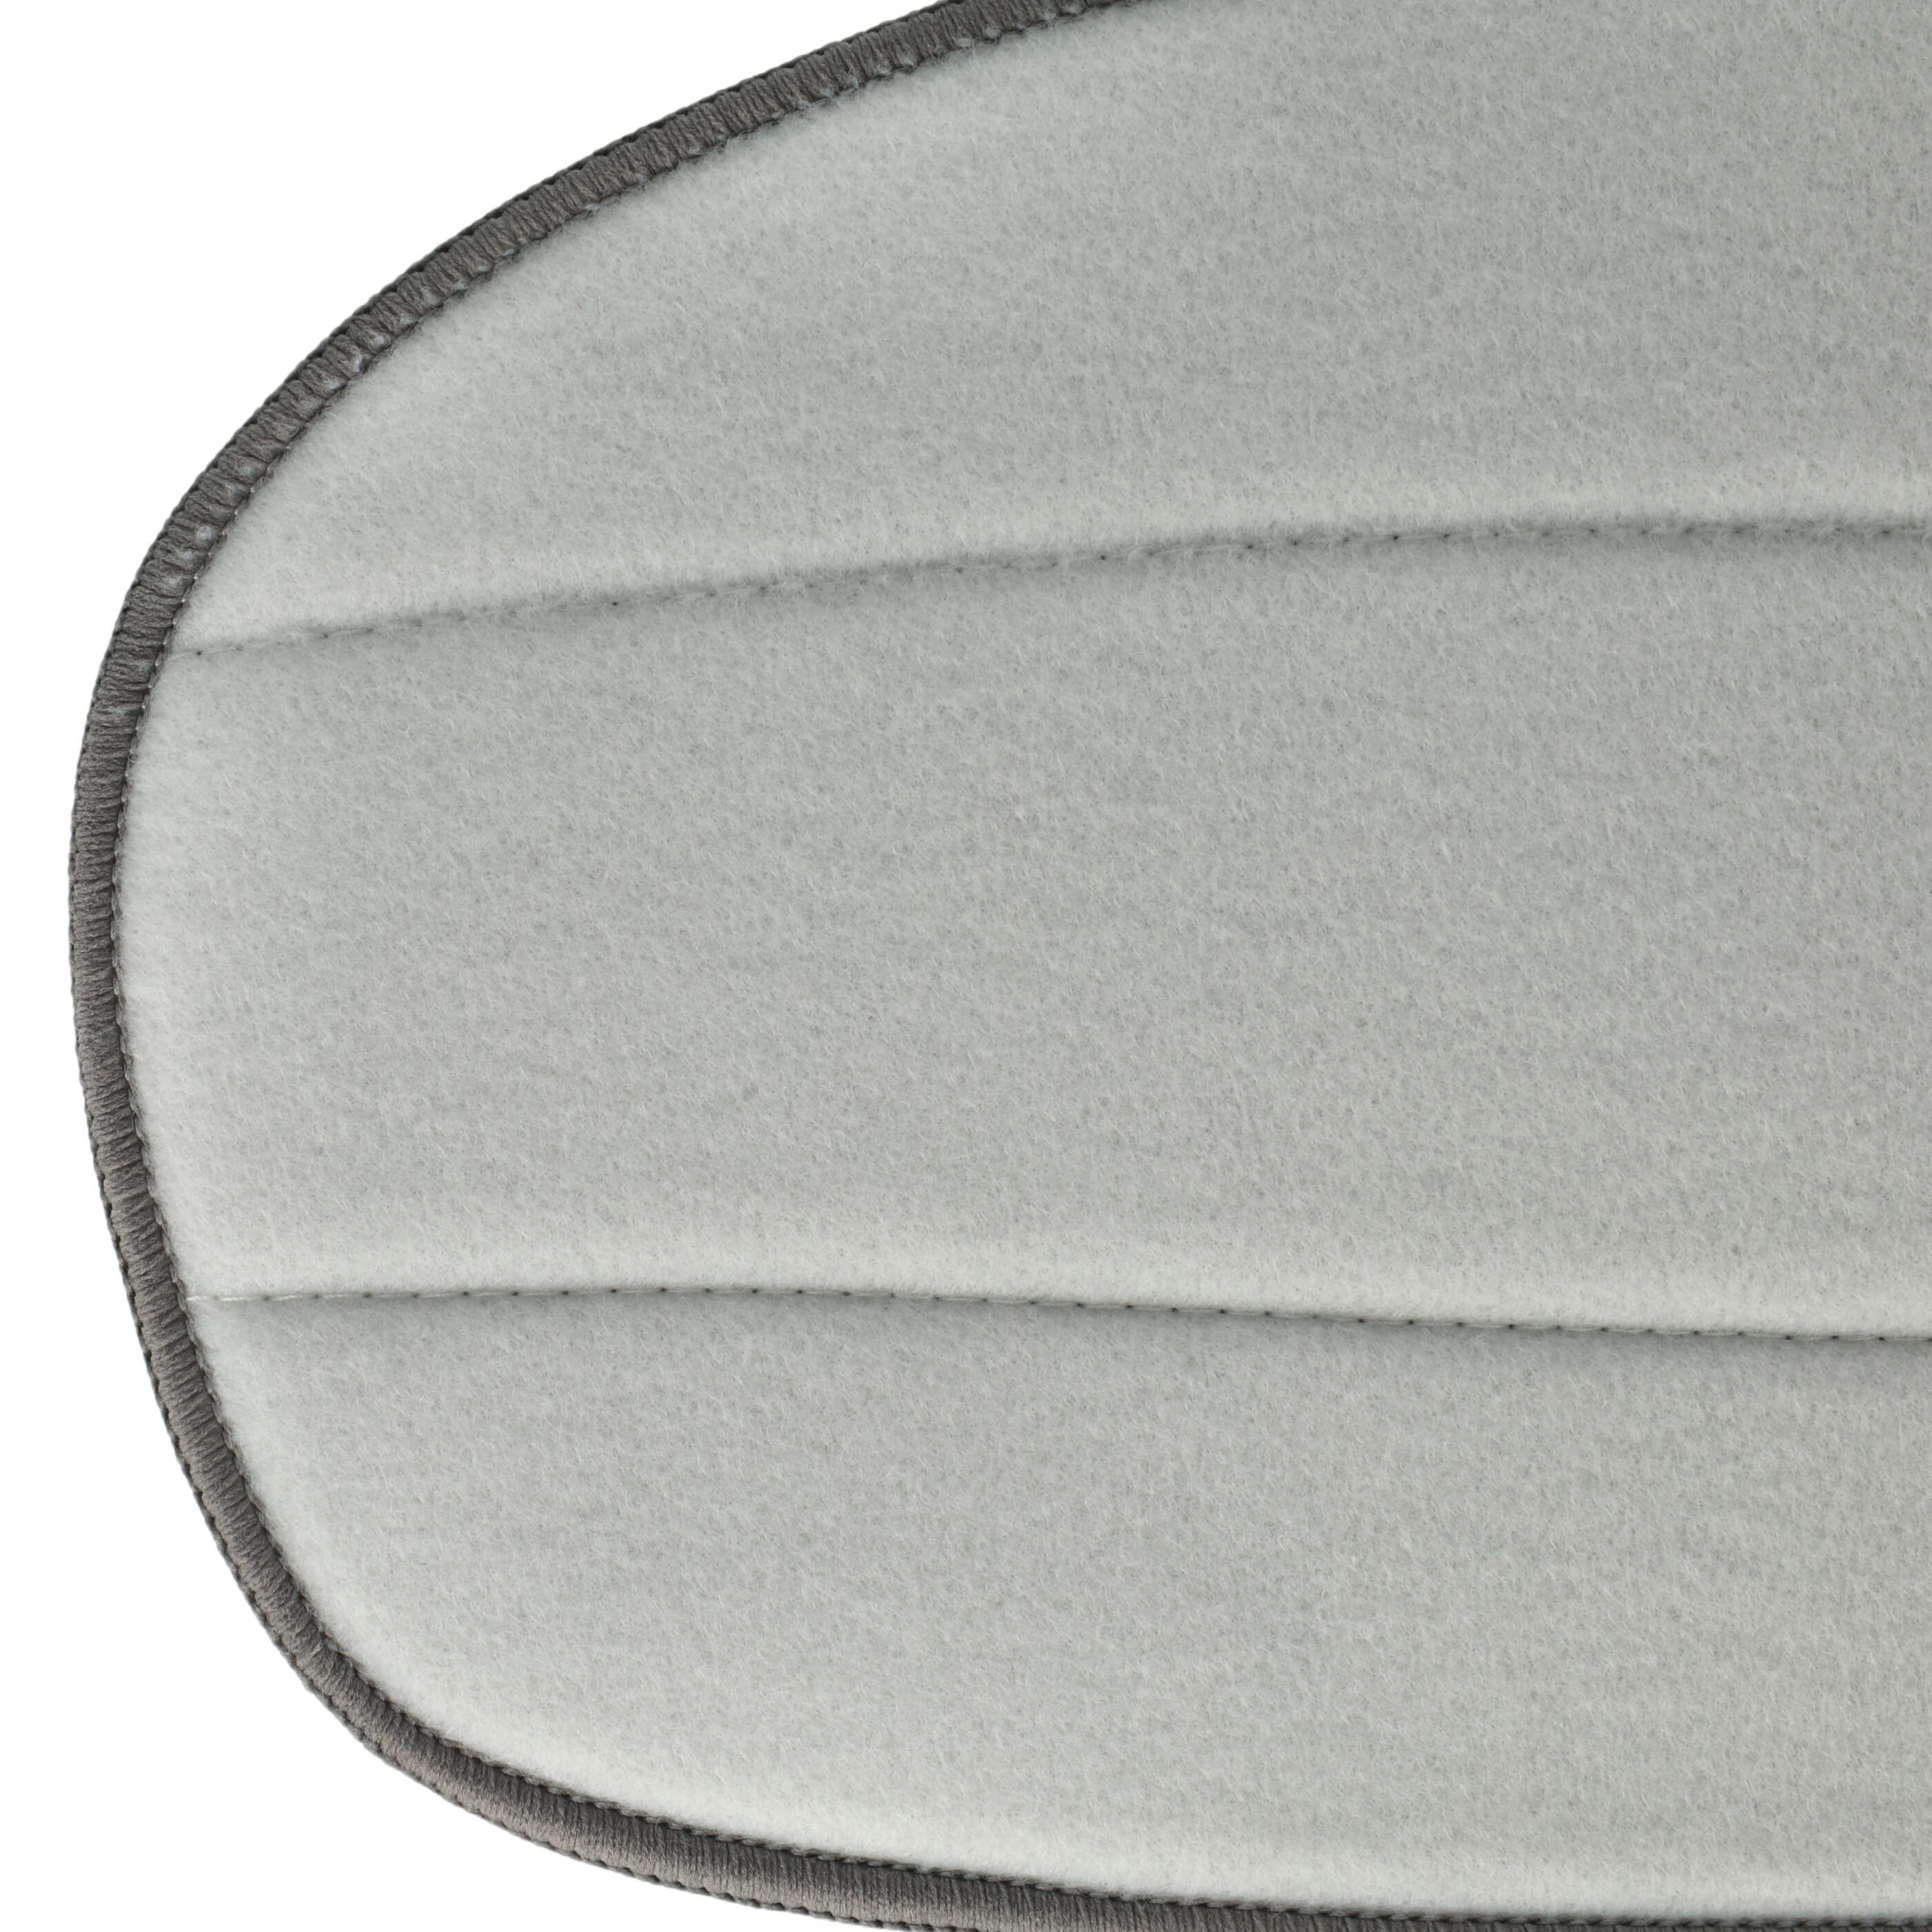 2x Cleaning Pad replaces Leifheit 11911 for LeifheitHot Spray Steamer, Steam Mop - Microfibre Grey